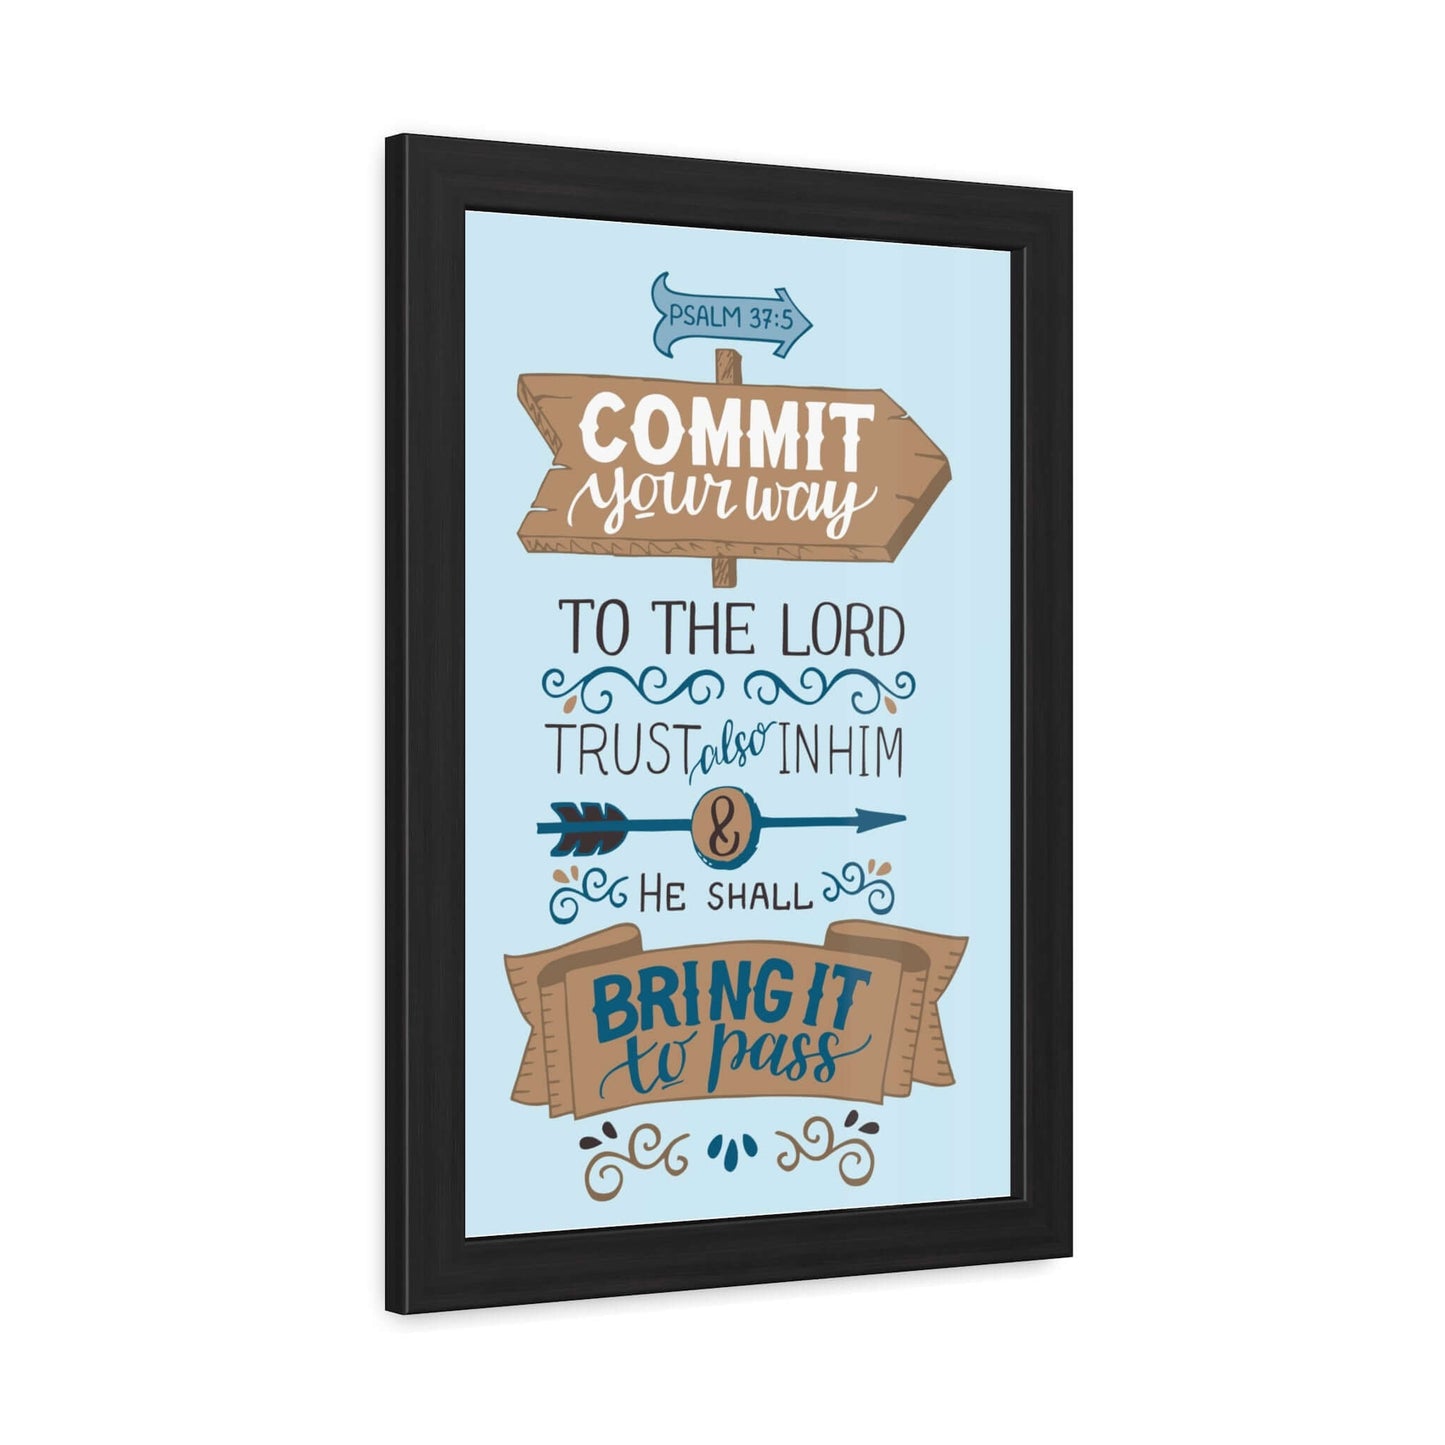 Poster Framed with Hand-Crafted Wooden Frame - Featuring Psalm 37:5 | Art & Wall Decor,Framed,Hanging Hardware,Home & Living,Poster,Posters